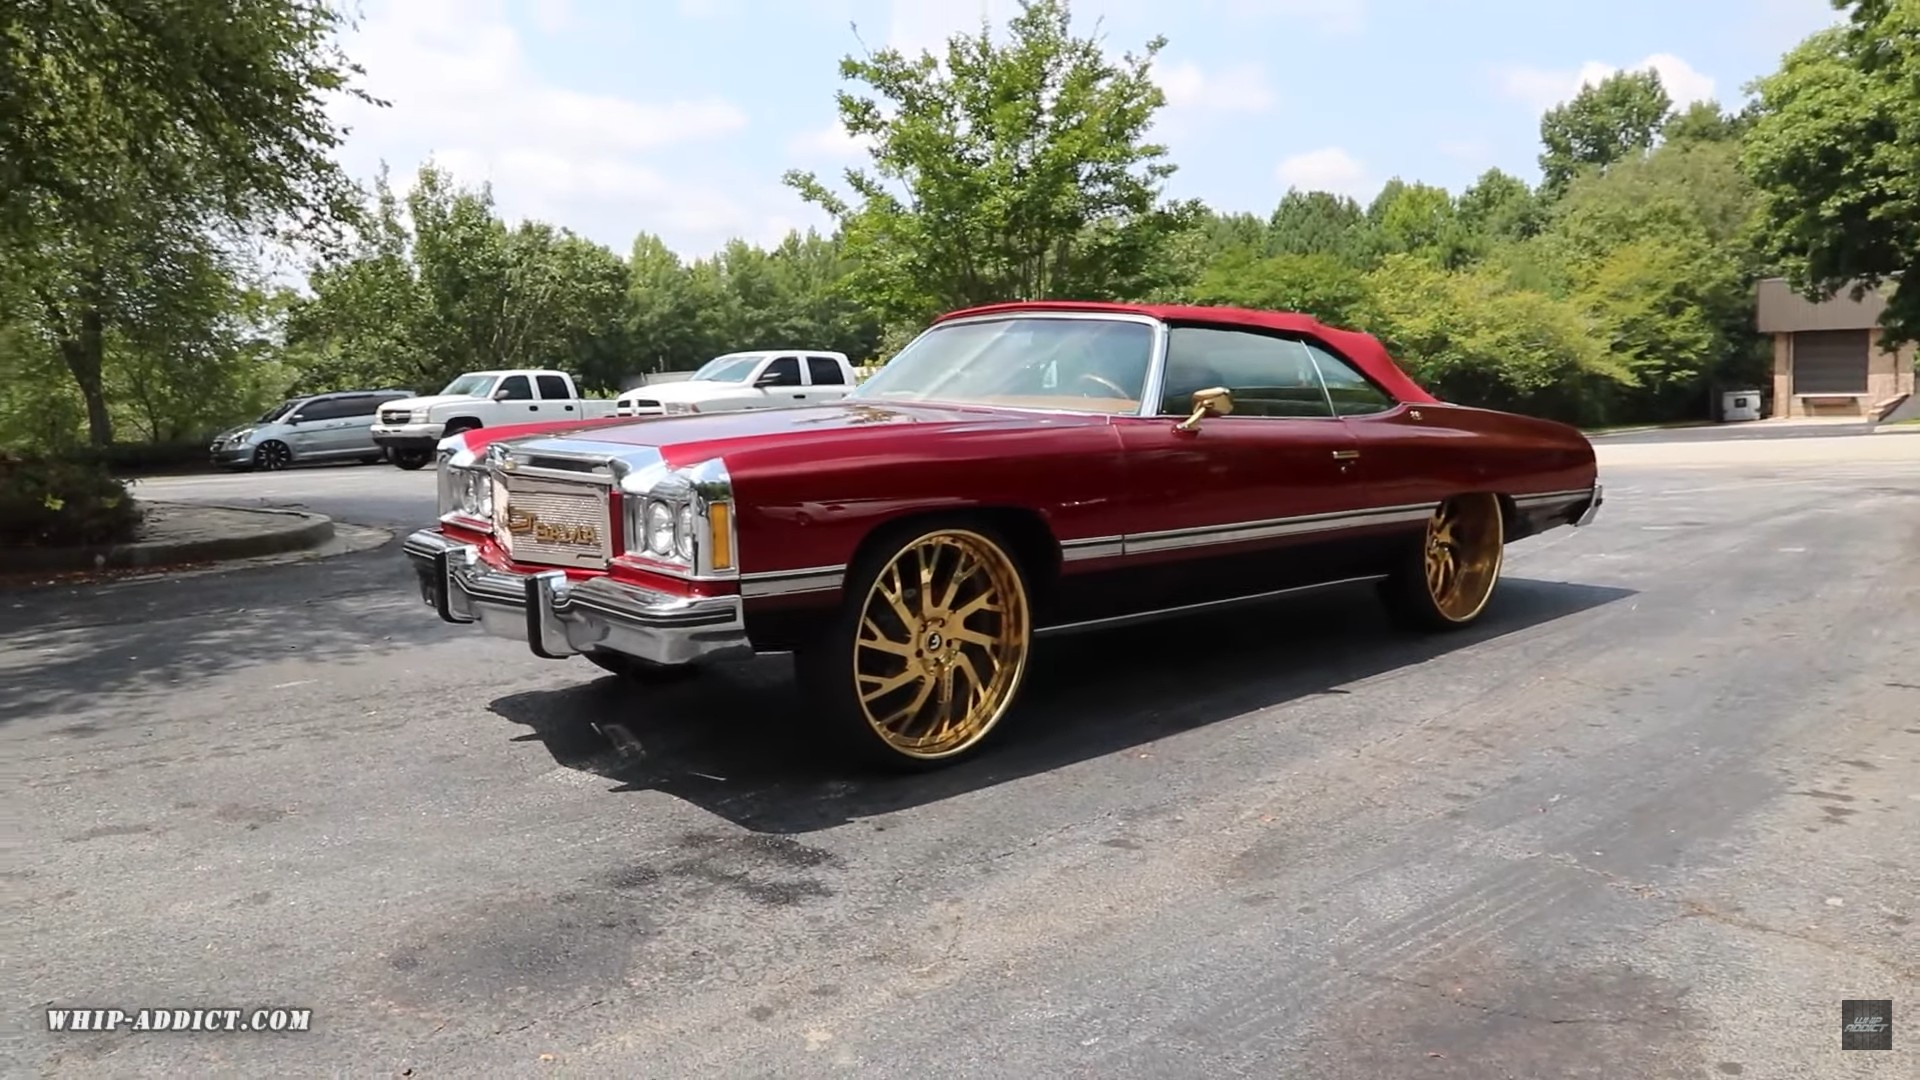 Brandywine 1974 Chevy Caprice Vert on Gold 26s Needs Supercharged